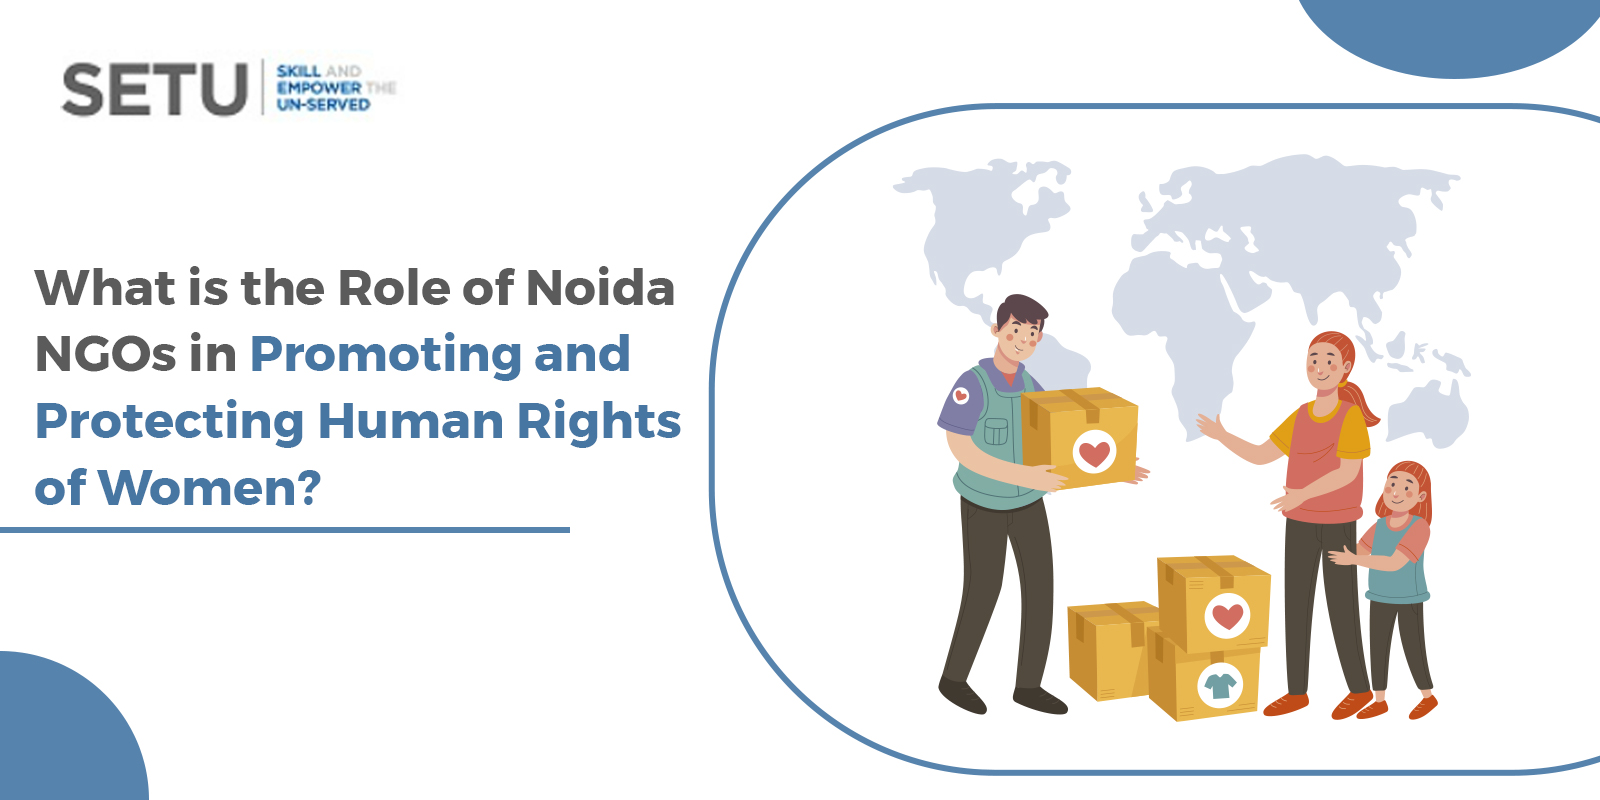 Noida NGOs in Promoting and Protecting Human Rights of Women